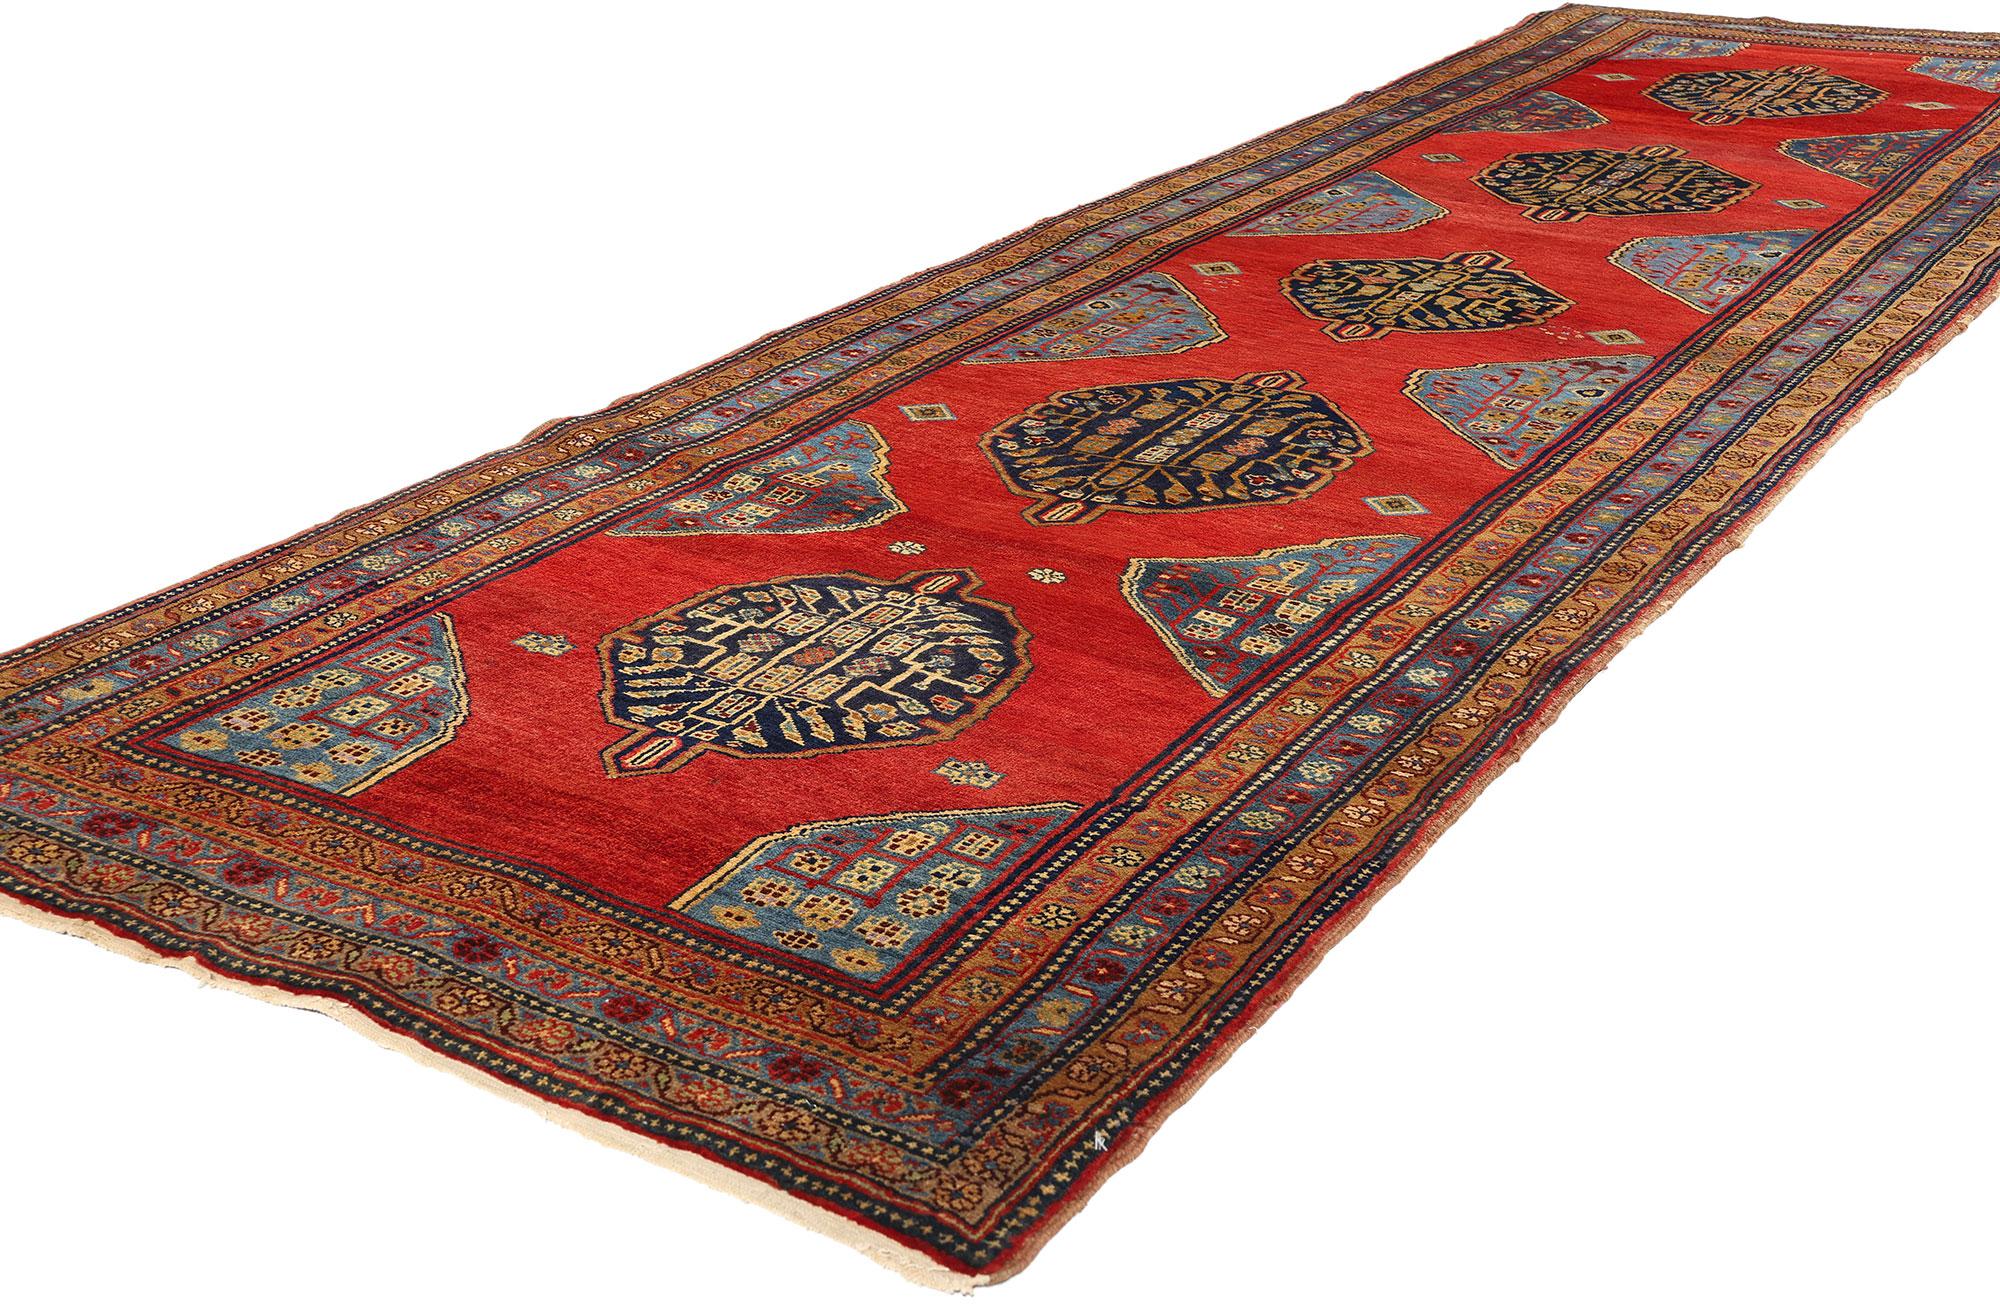 75380 Vintage Red Persian Azerbaijan Rug Runner, 03'07 x 11'06. Persian Azerbaijan rugs, originating from the Azerbaijan region in northwestern Iran and the Republic of Azerbaijan, are prized for their intricate designs, vibrant colors, and rich